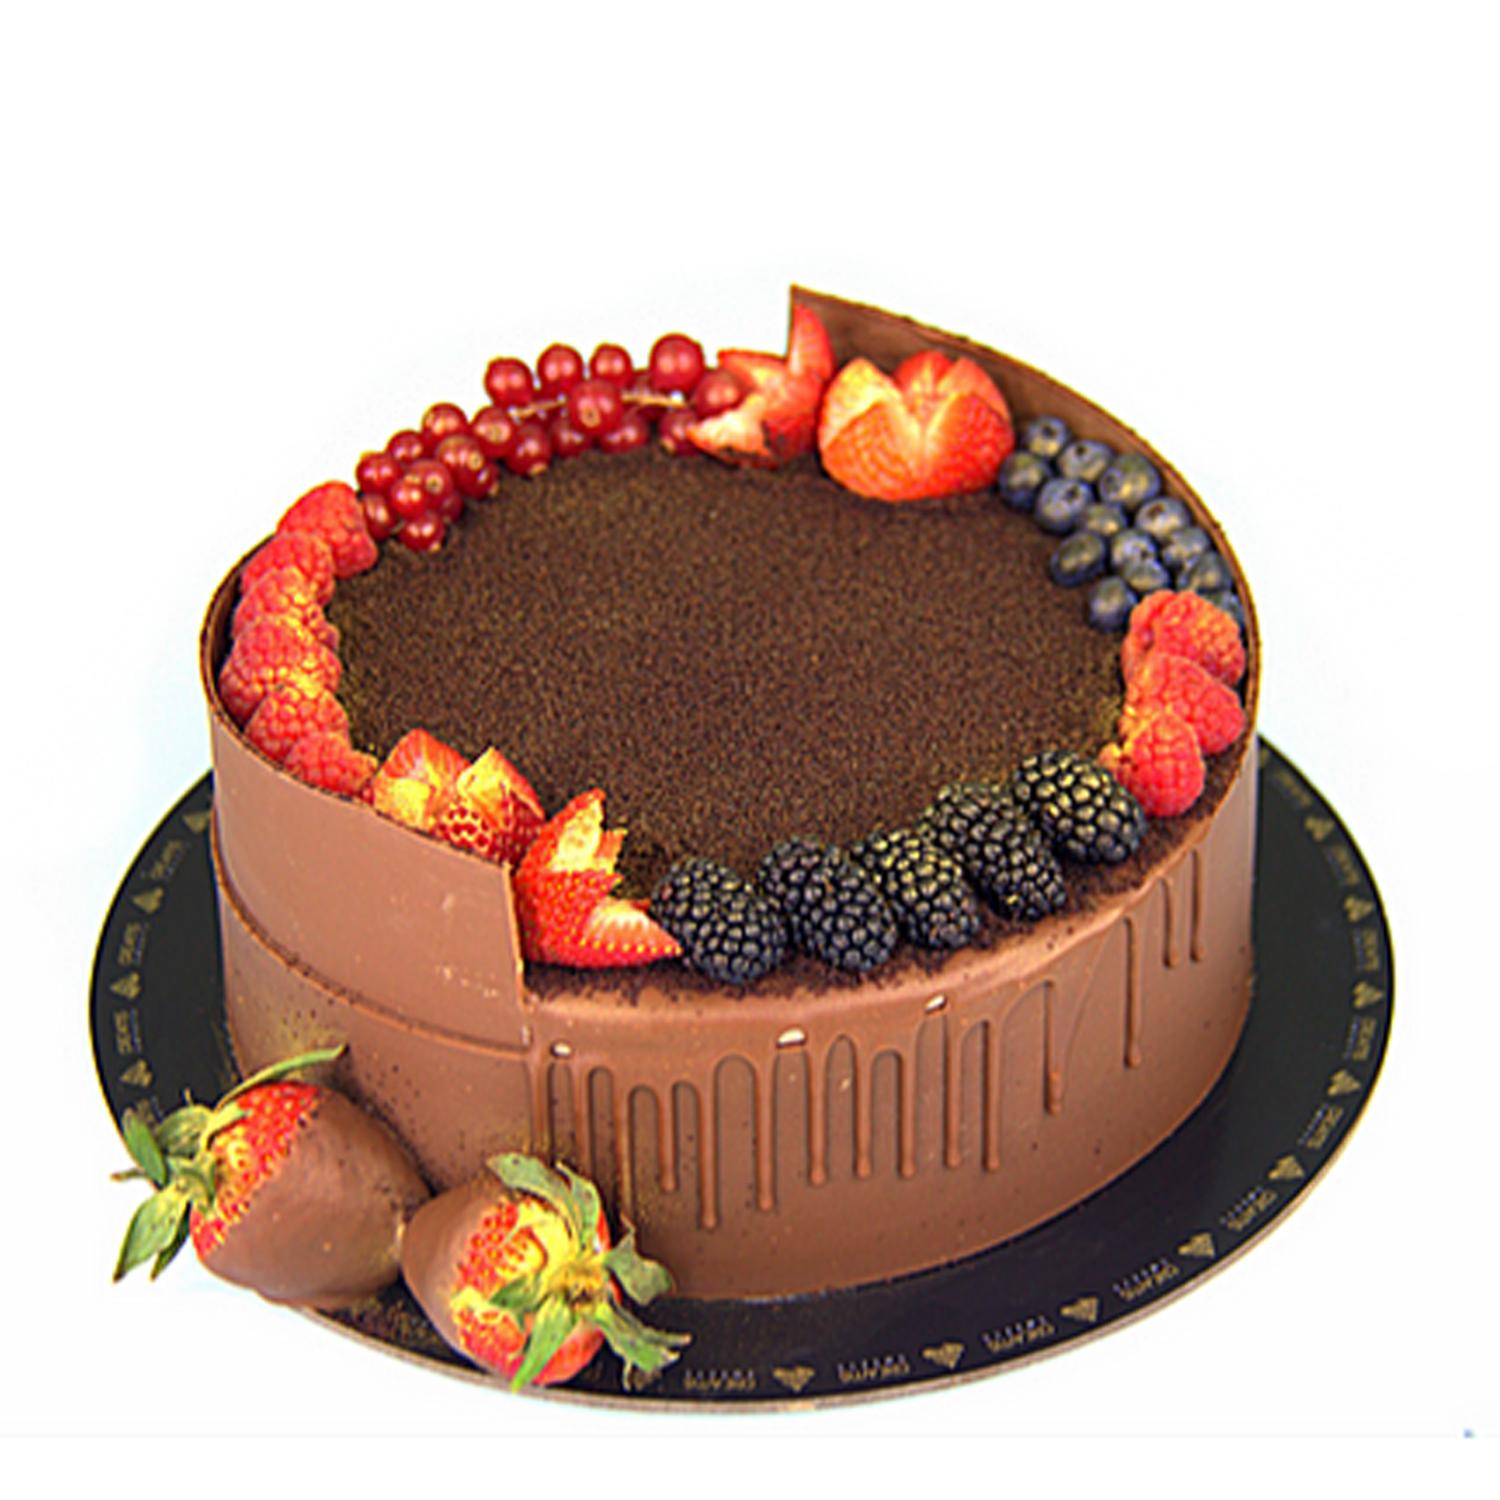 Buy Premium Chocolate Loaded Cake online from Cakelicious